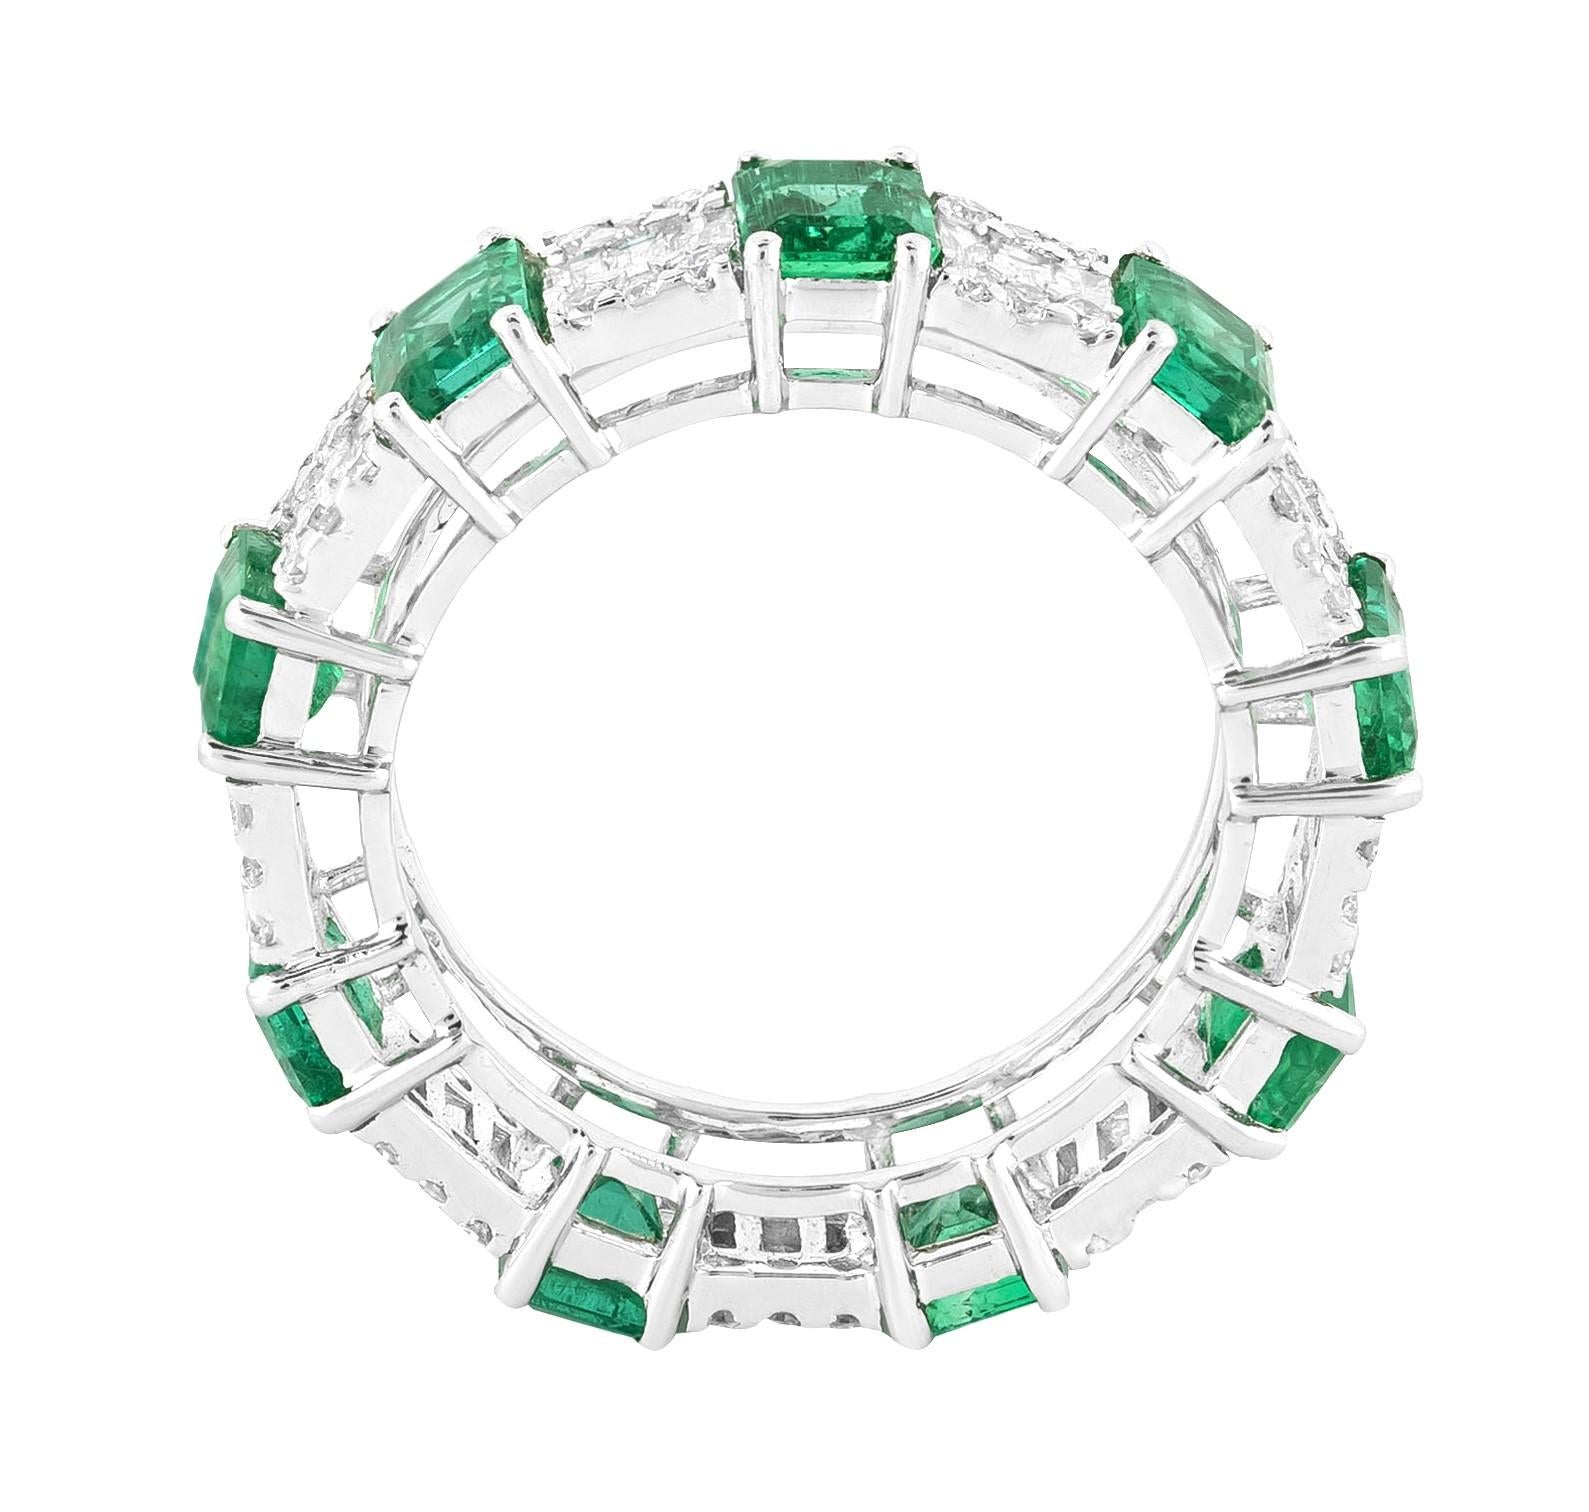 Women's 18 Karat Gold 5.02 Carat Diamond and Emerald Infinity Band Ring  For Sale